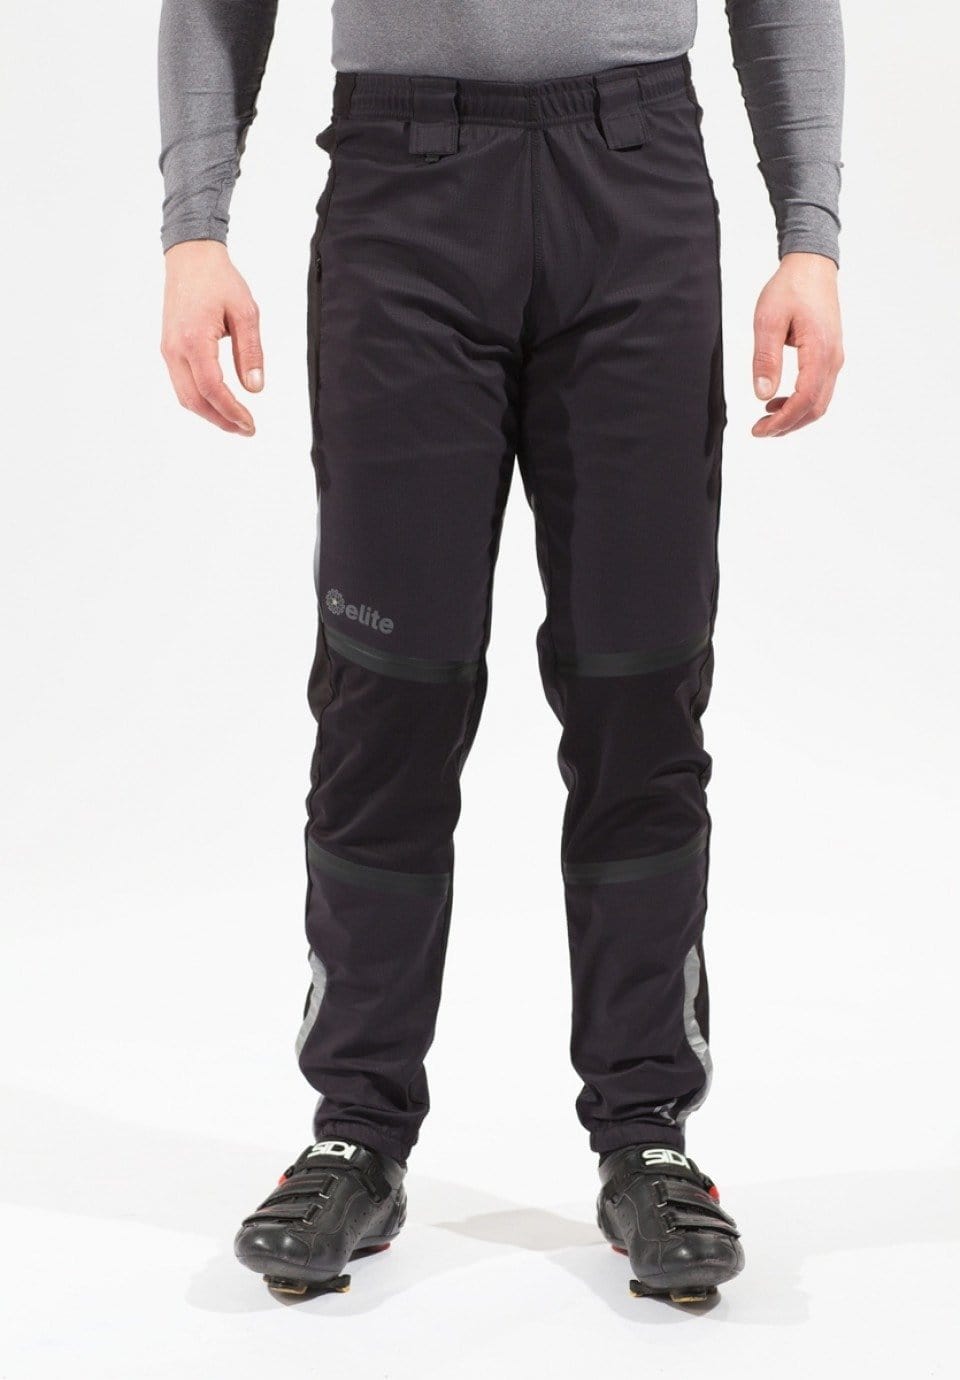 Skyline Pant front with